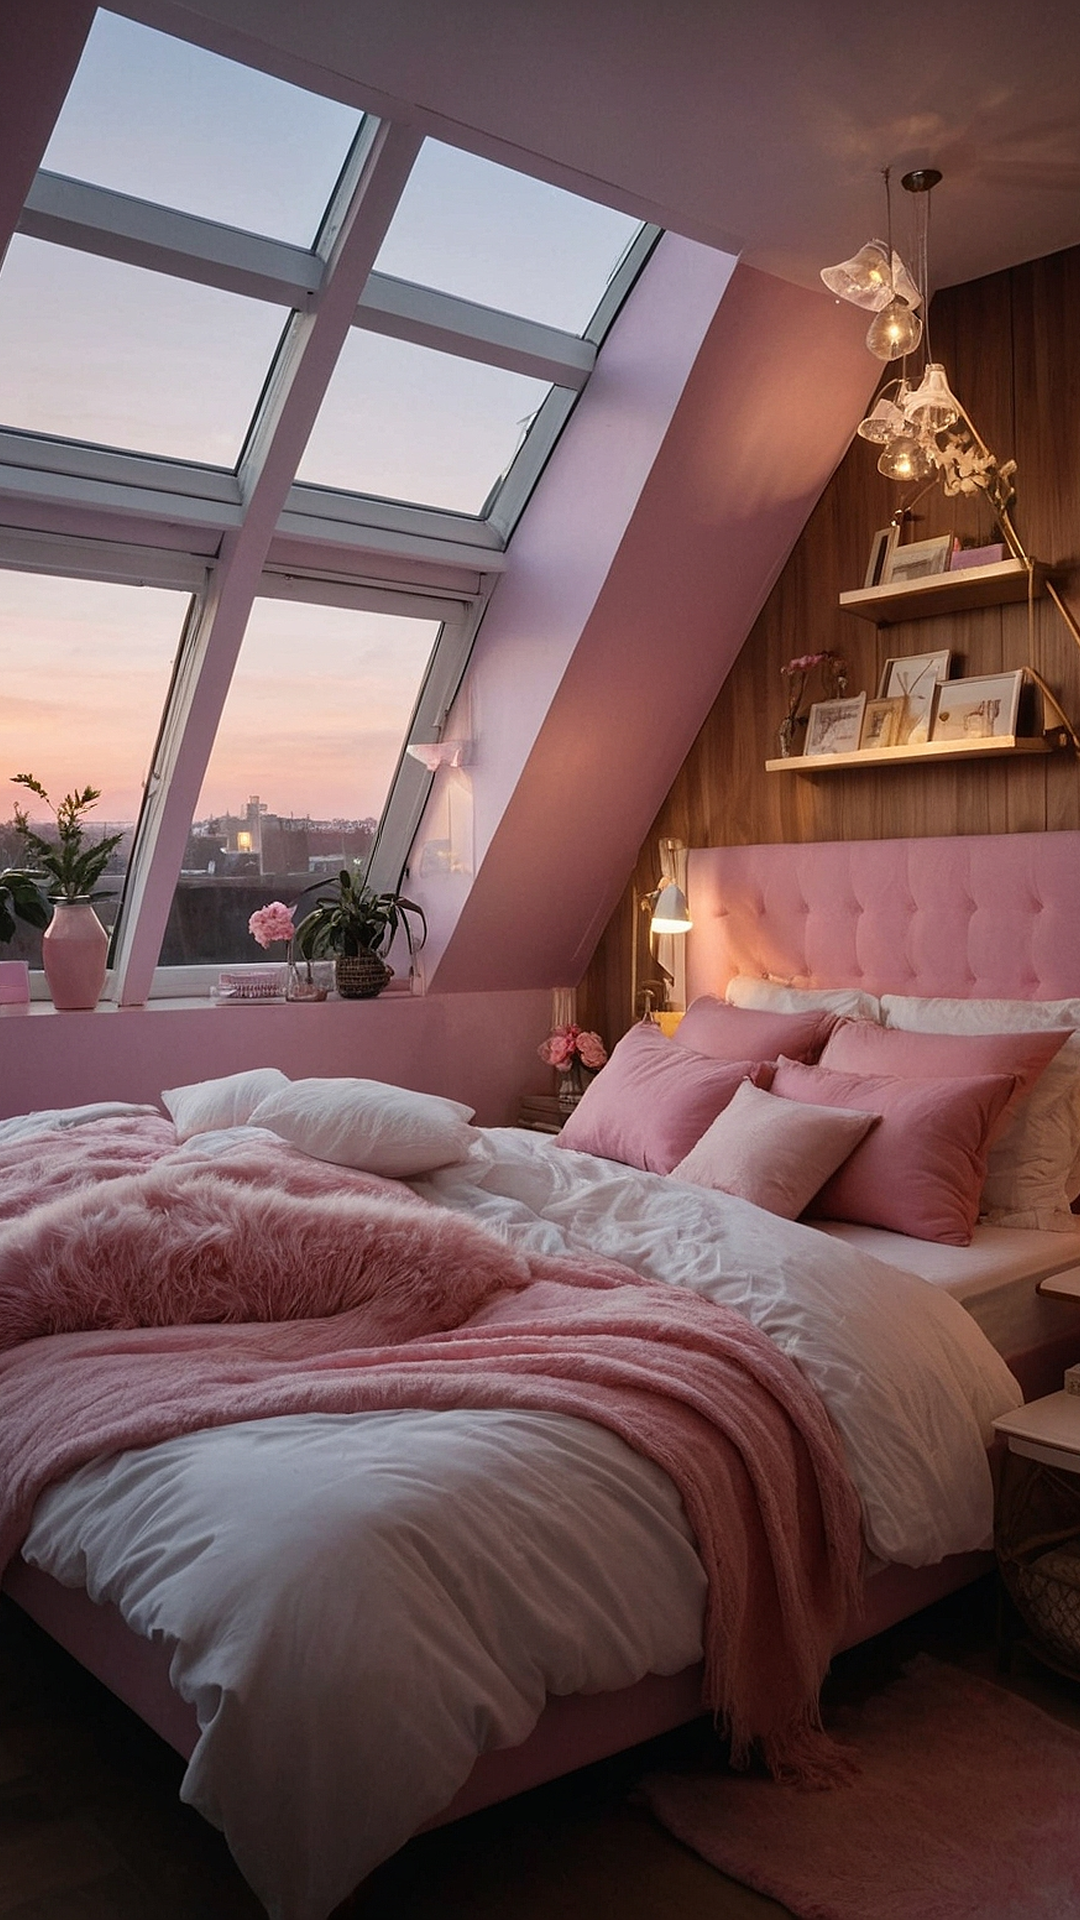 Rose-Colored Dreams: Pink Bedroom Inspiration